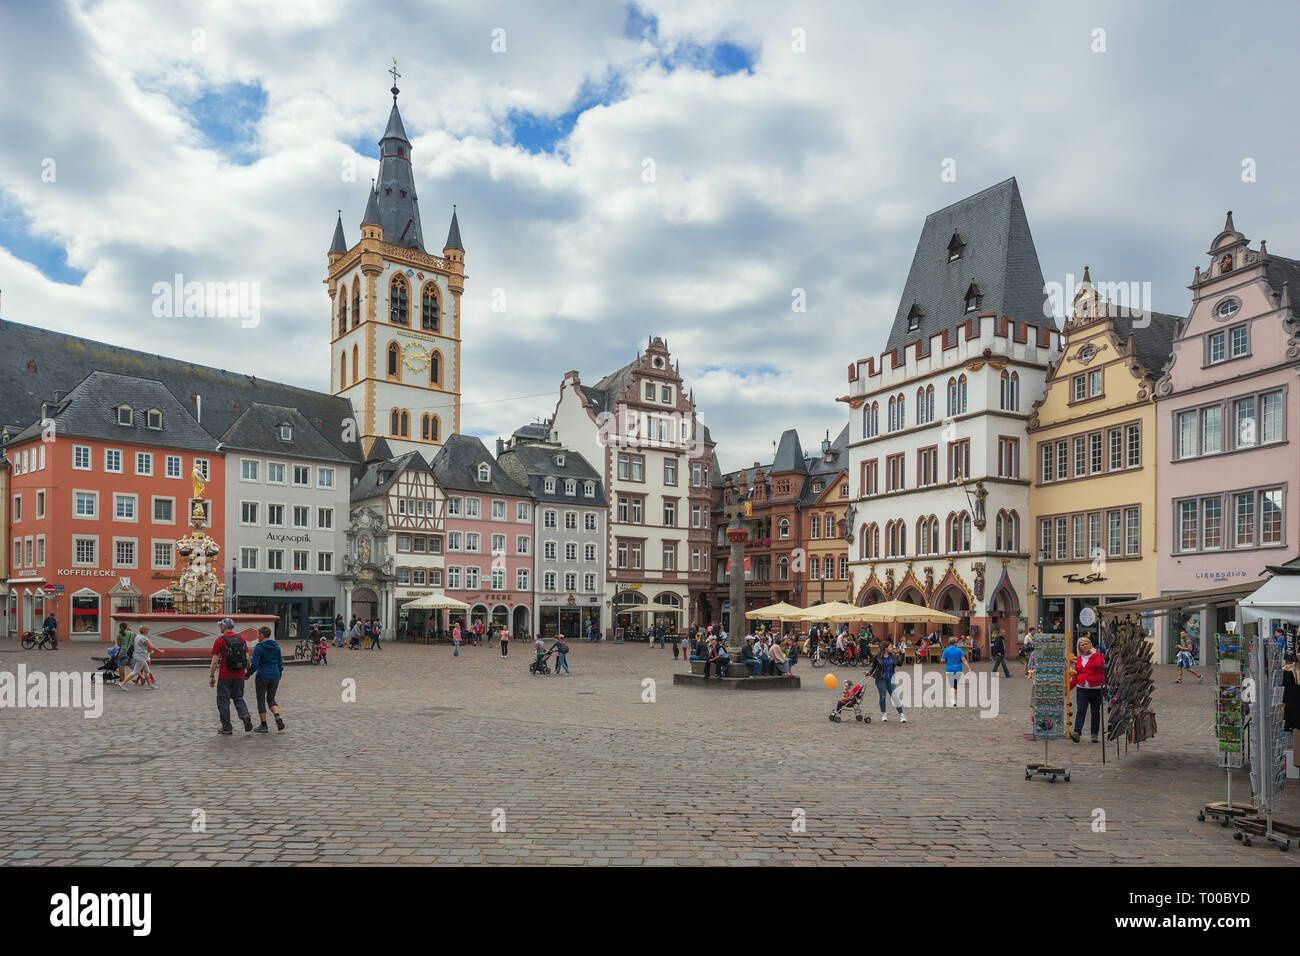 Editorial: TRIER, RHINELAND-PALATINATE, GERMANY, September 2, 2018 - Many tourists and day trippers on the central market in Trier strolling around Stock Photo